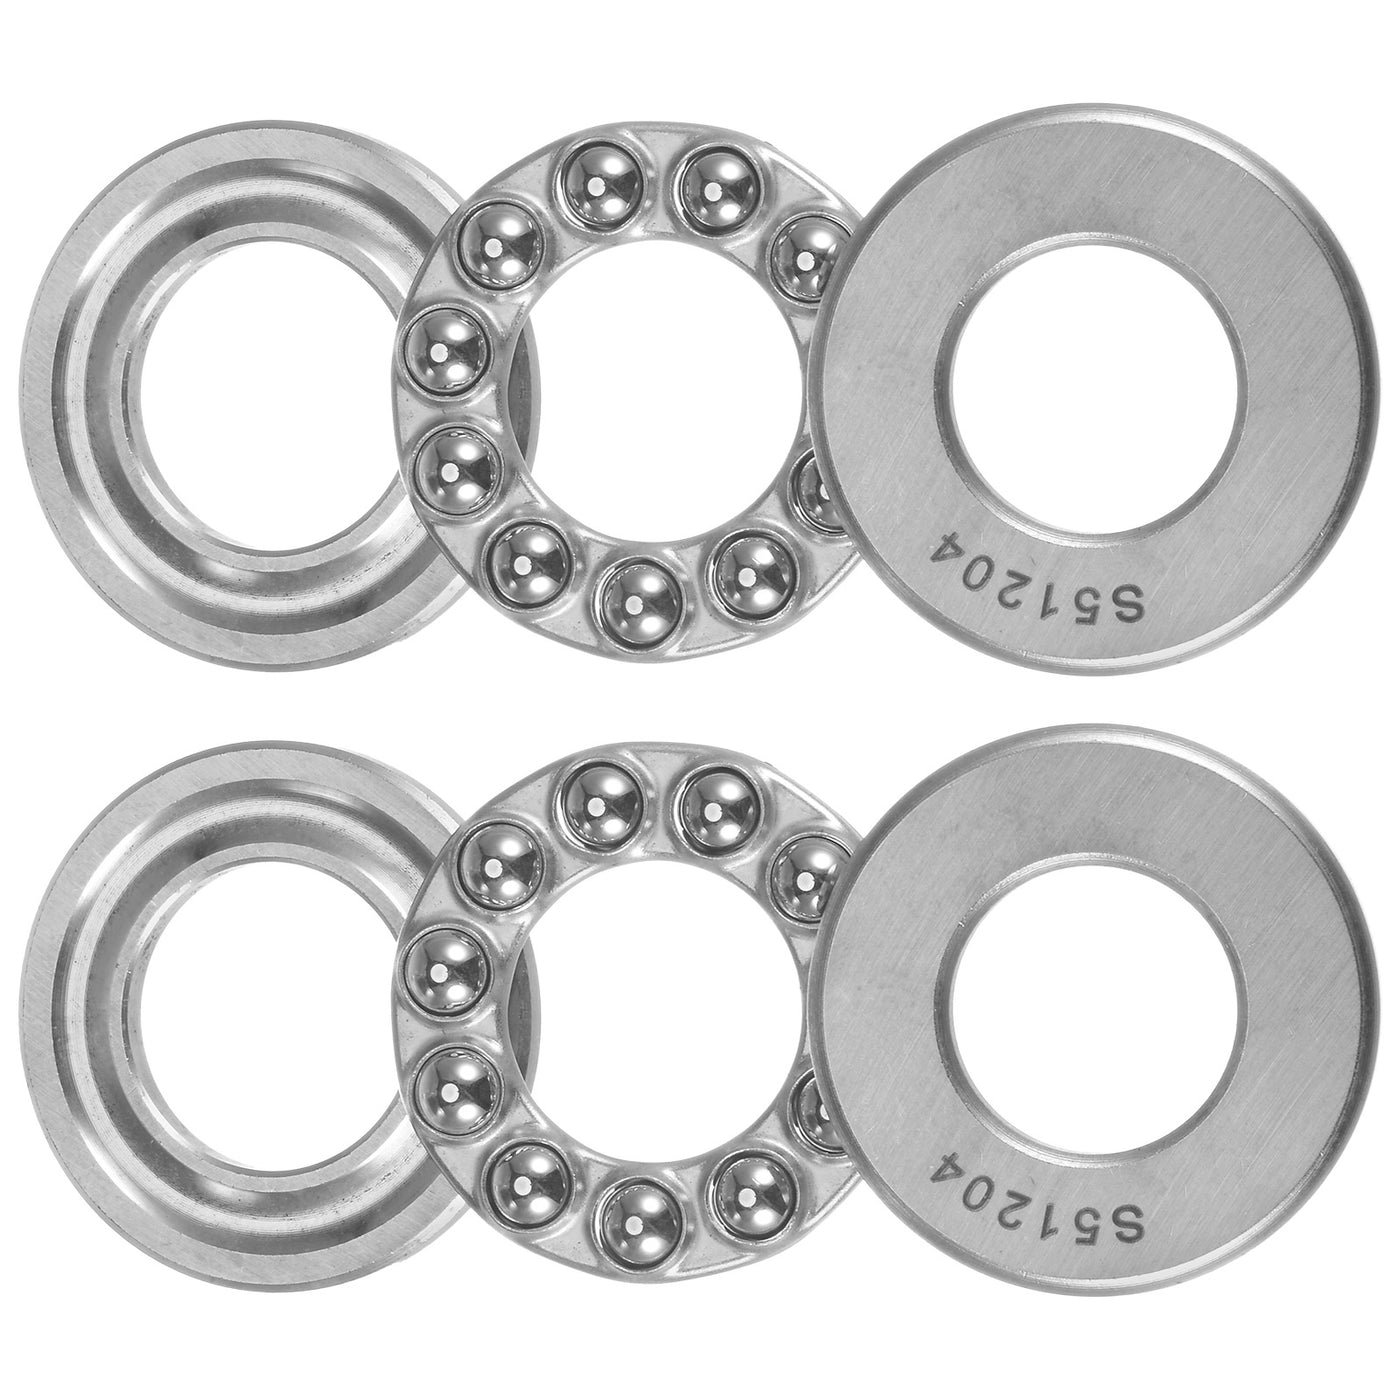 uxcell Uxcell S51204 Thrust Ball Bearing 20x40x14mm Stainless Steel with Washers 2pcs